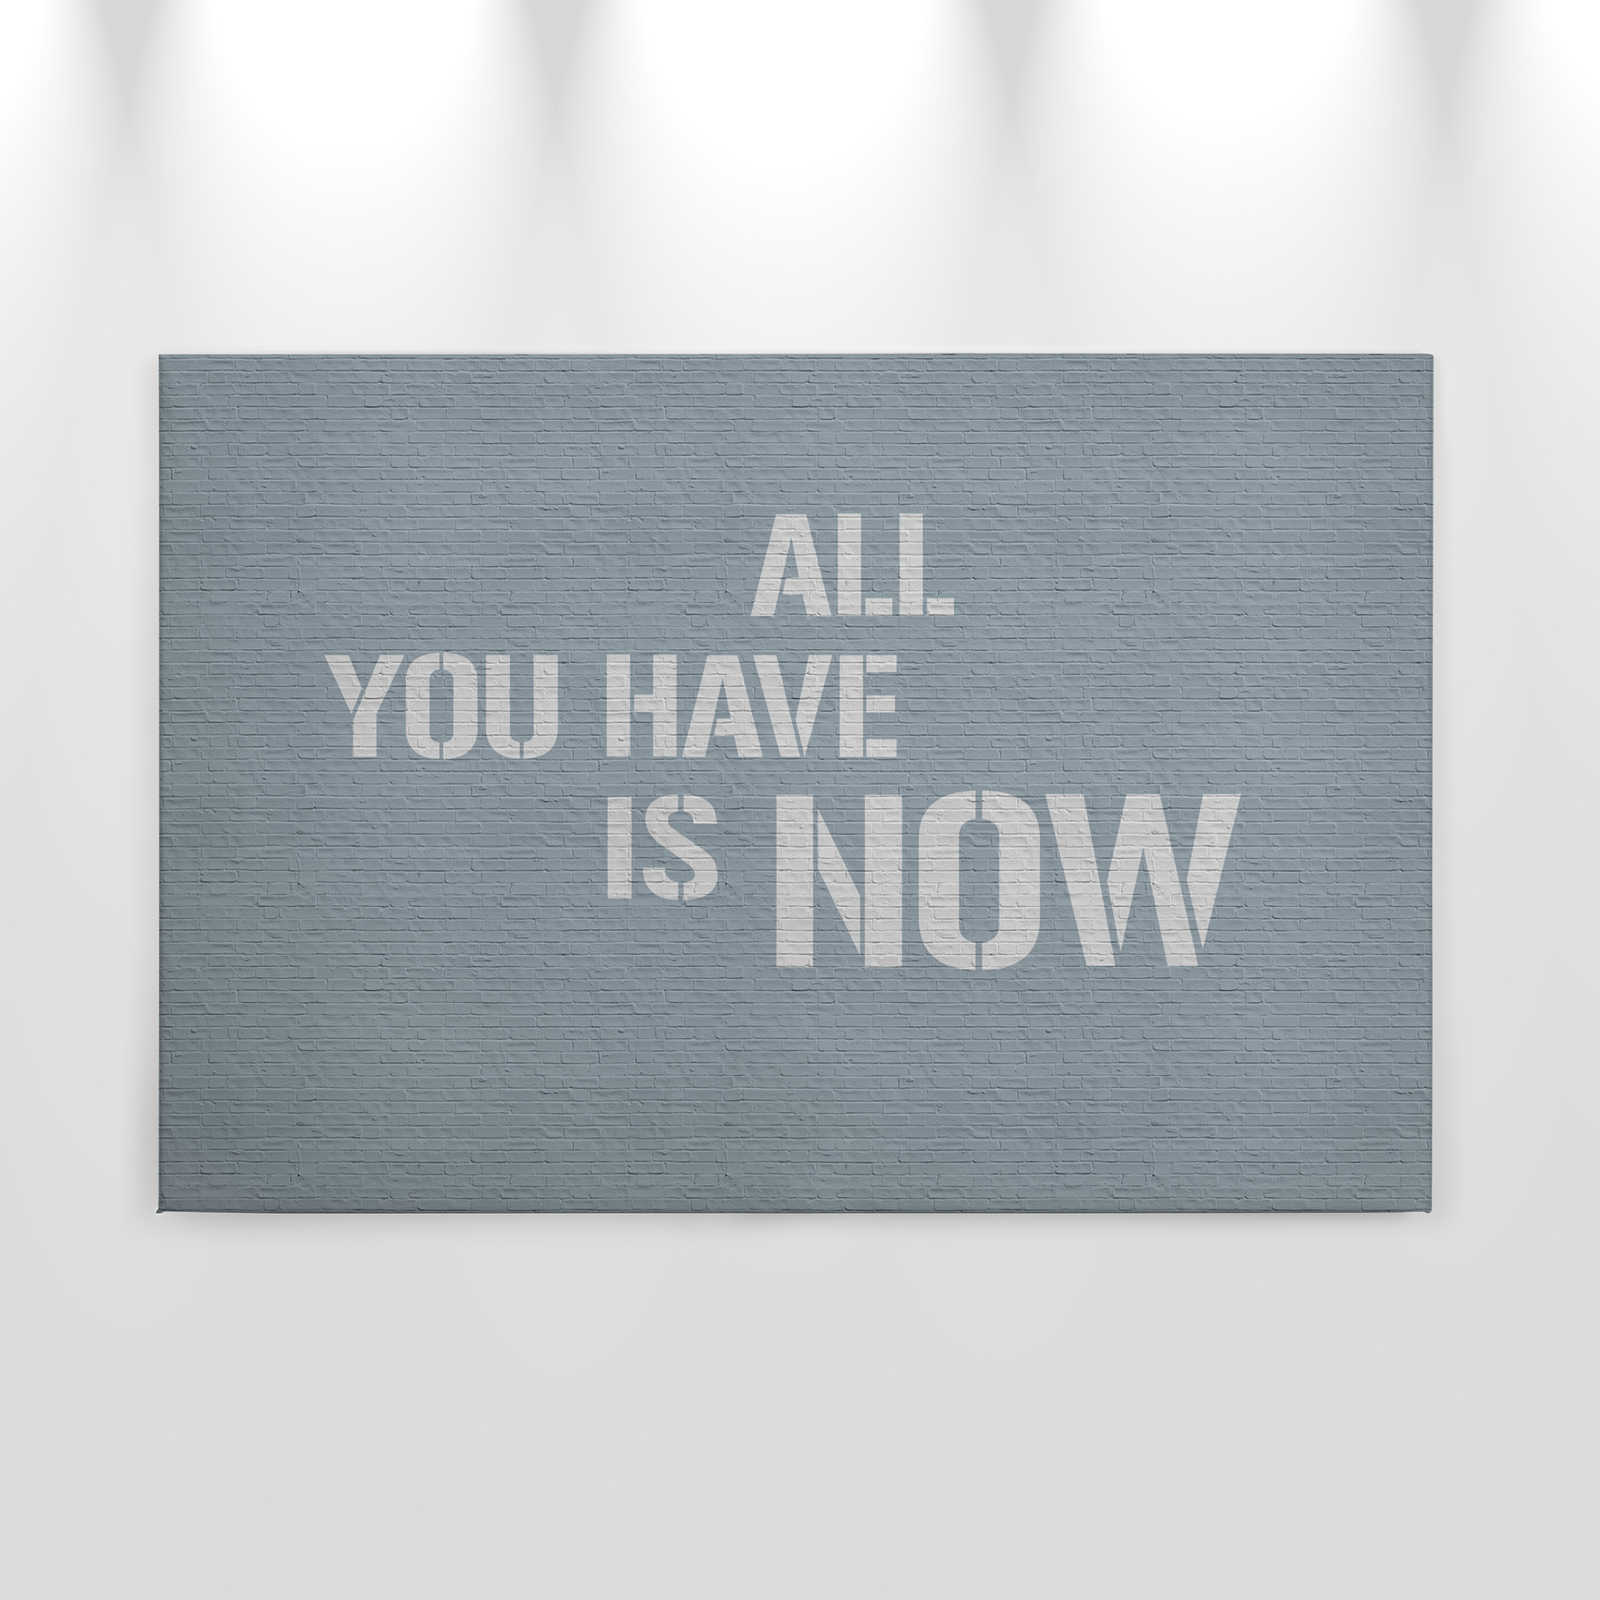             Message 1 - Grey brick wall with saying on canvas picture - 0.90 m x 0.60 m
        